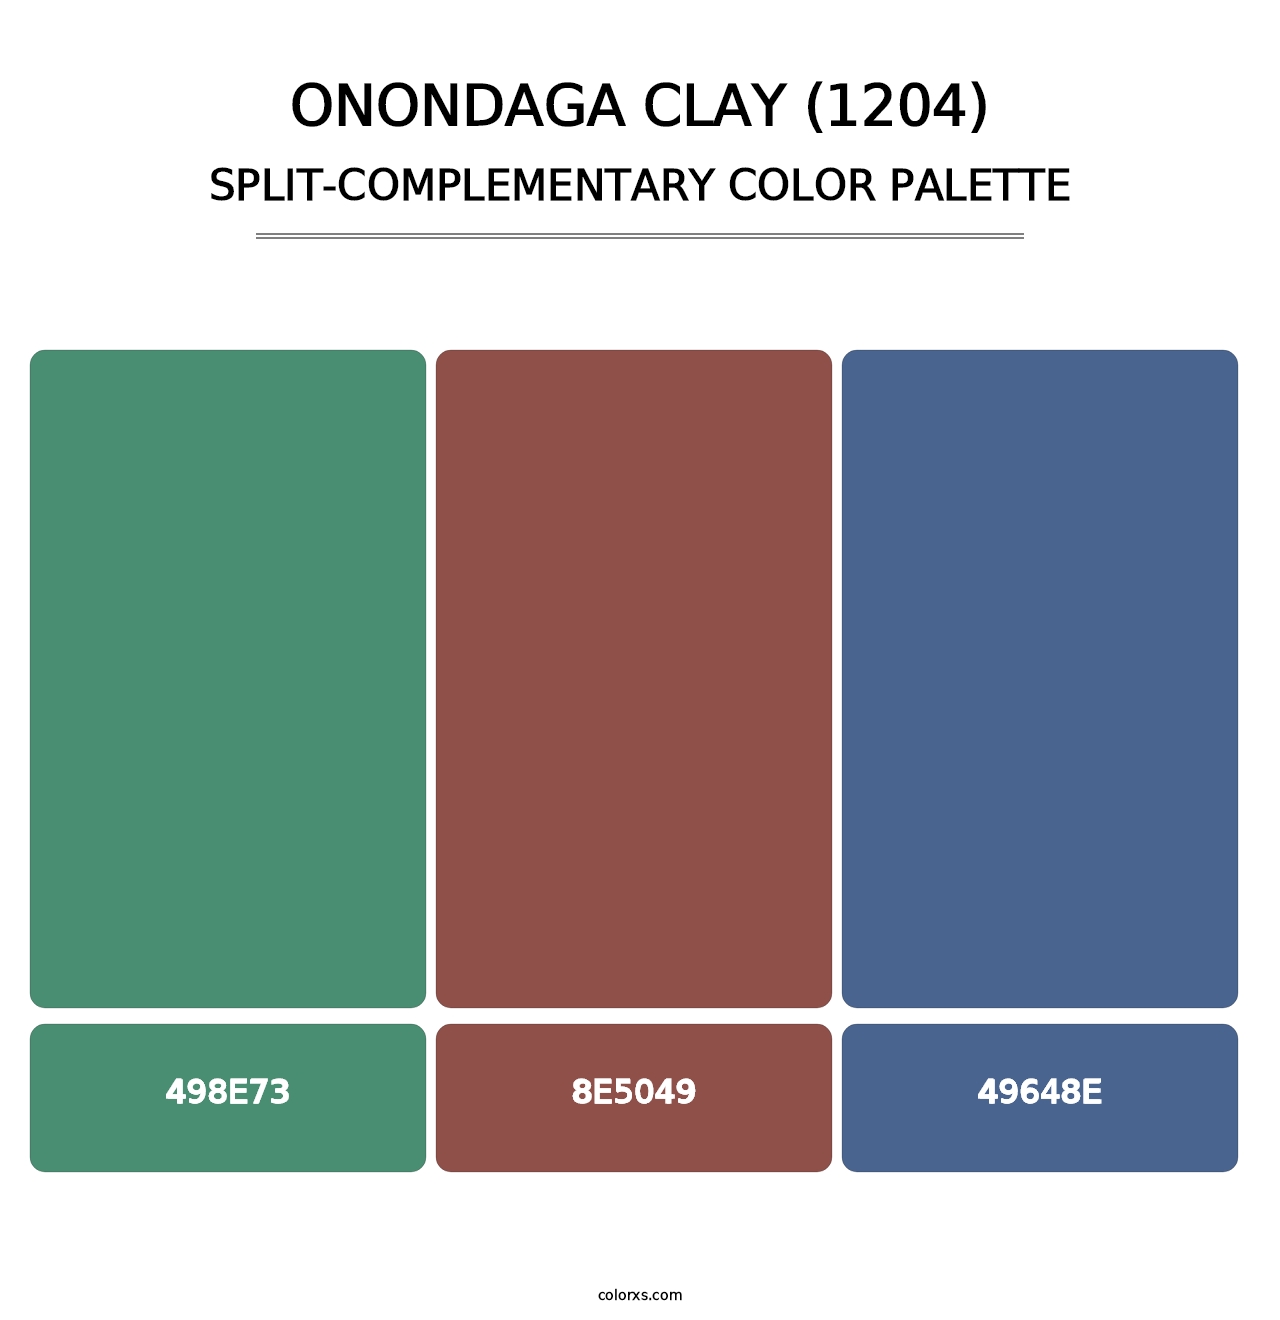 Onondaga Clay (1204) - Split-Complementary Color Palette